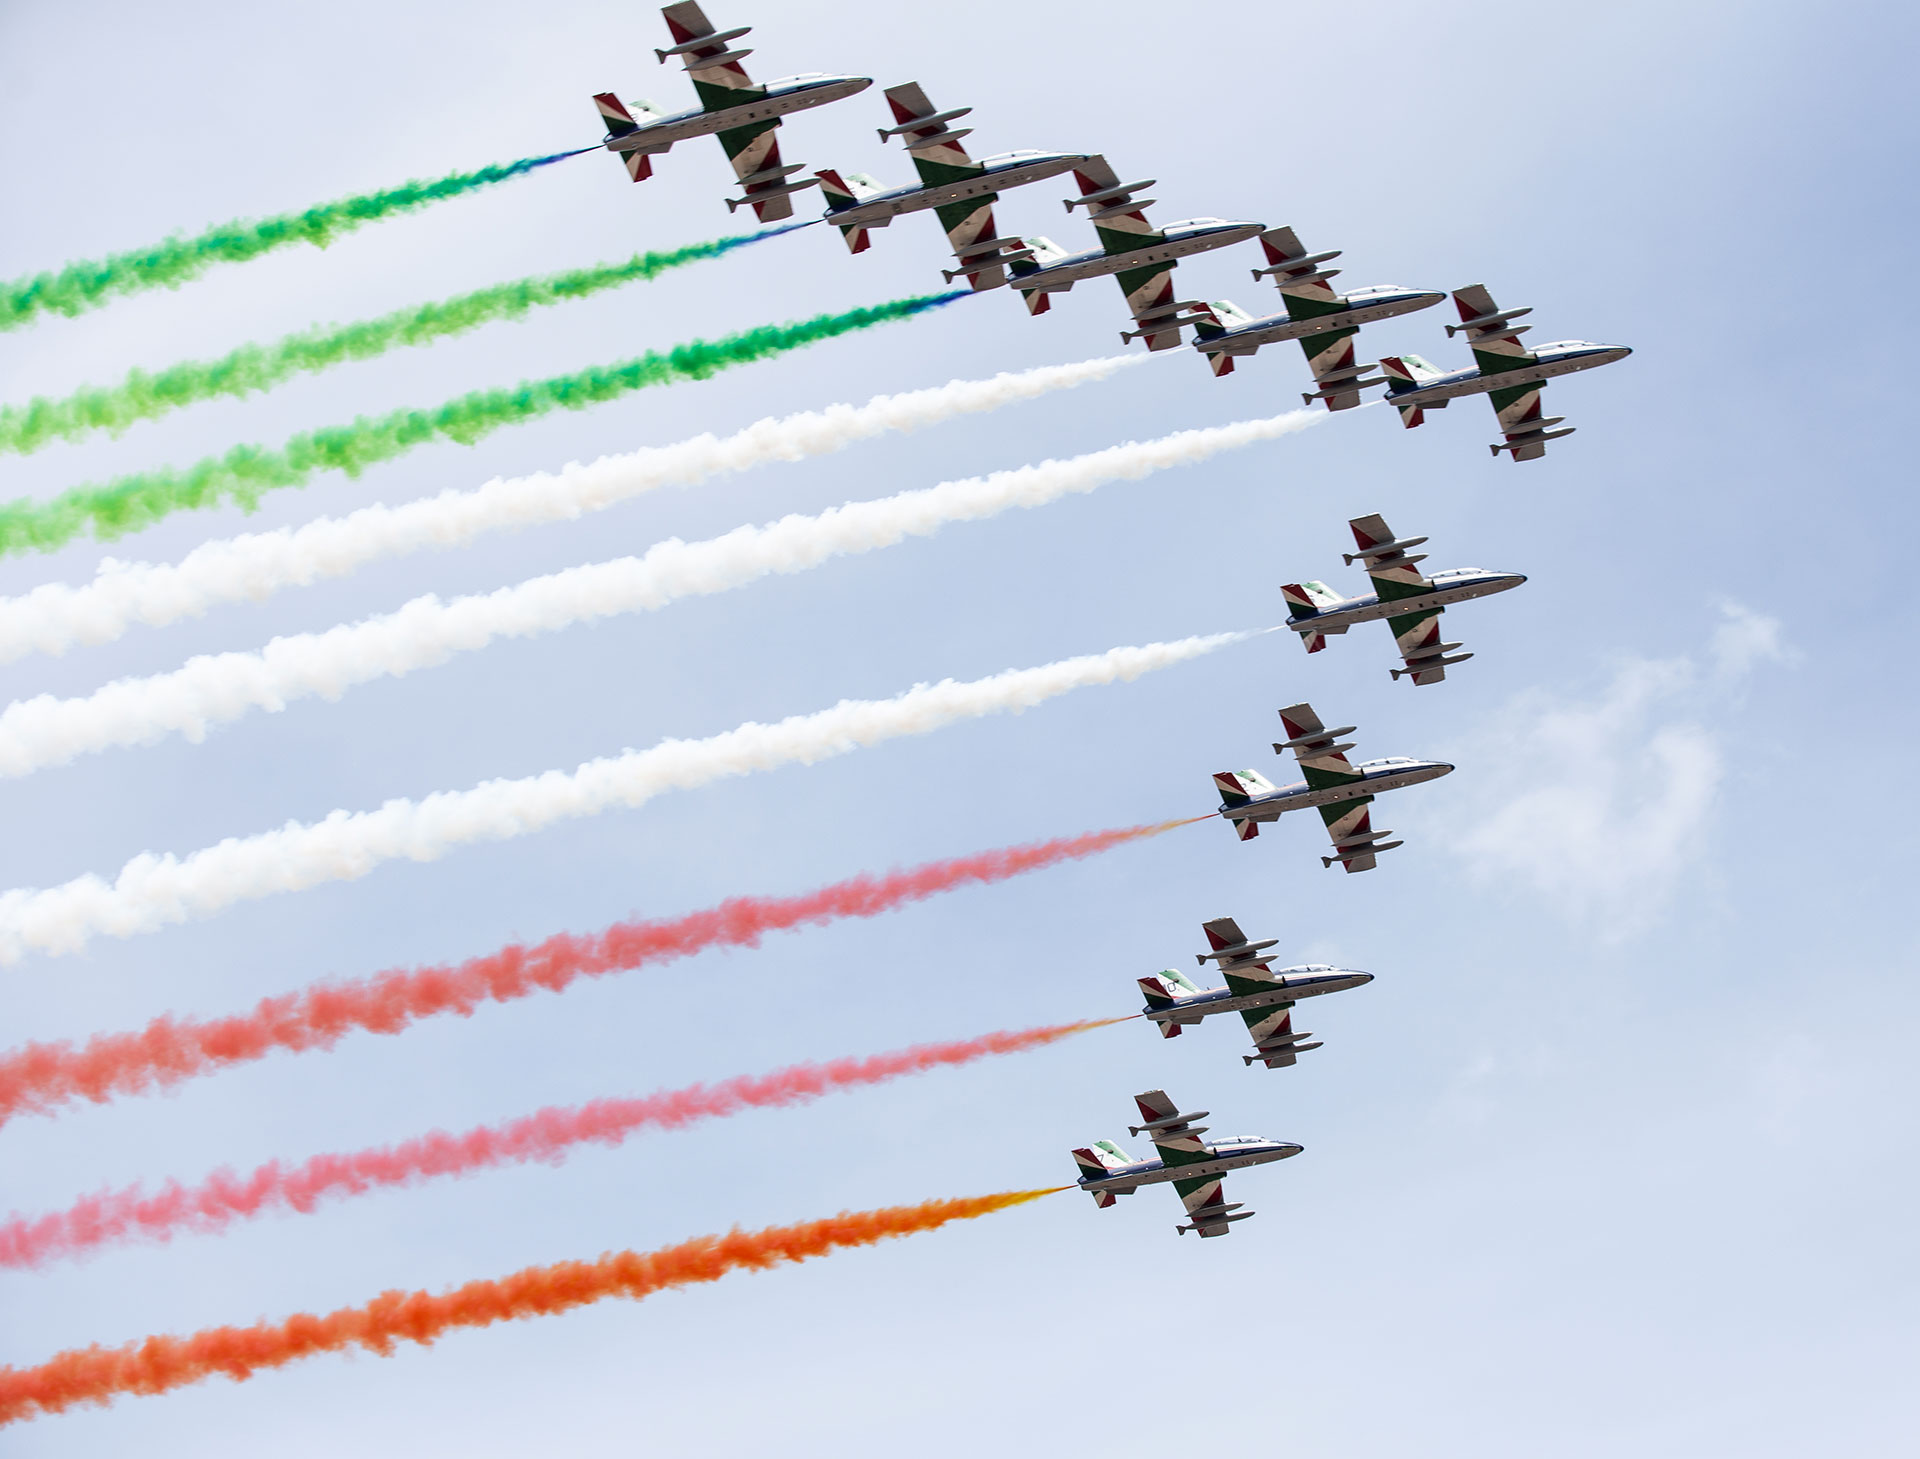 Tricolor Arrows flies over the sky as part of the celebration for the 74th anniversary of the proclamation of the Italian Republic in Campobasso, Italy. May 28, 2020-Laura Venezia